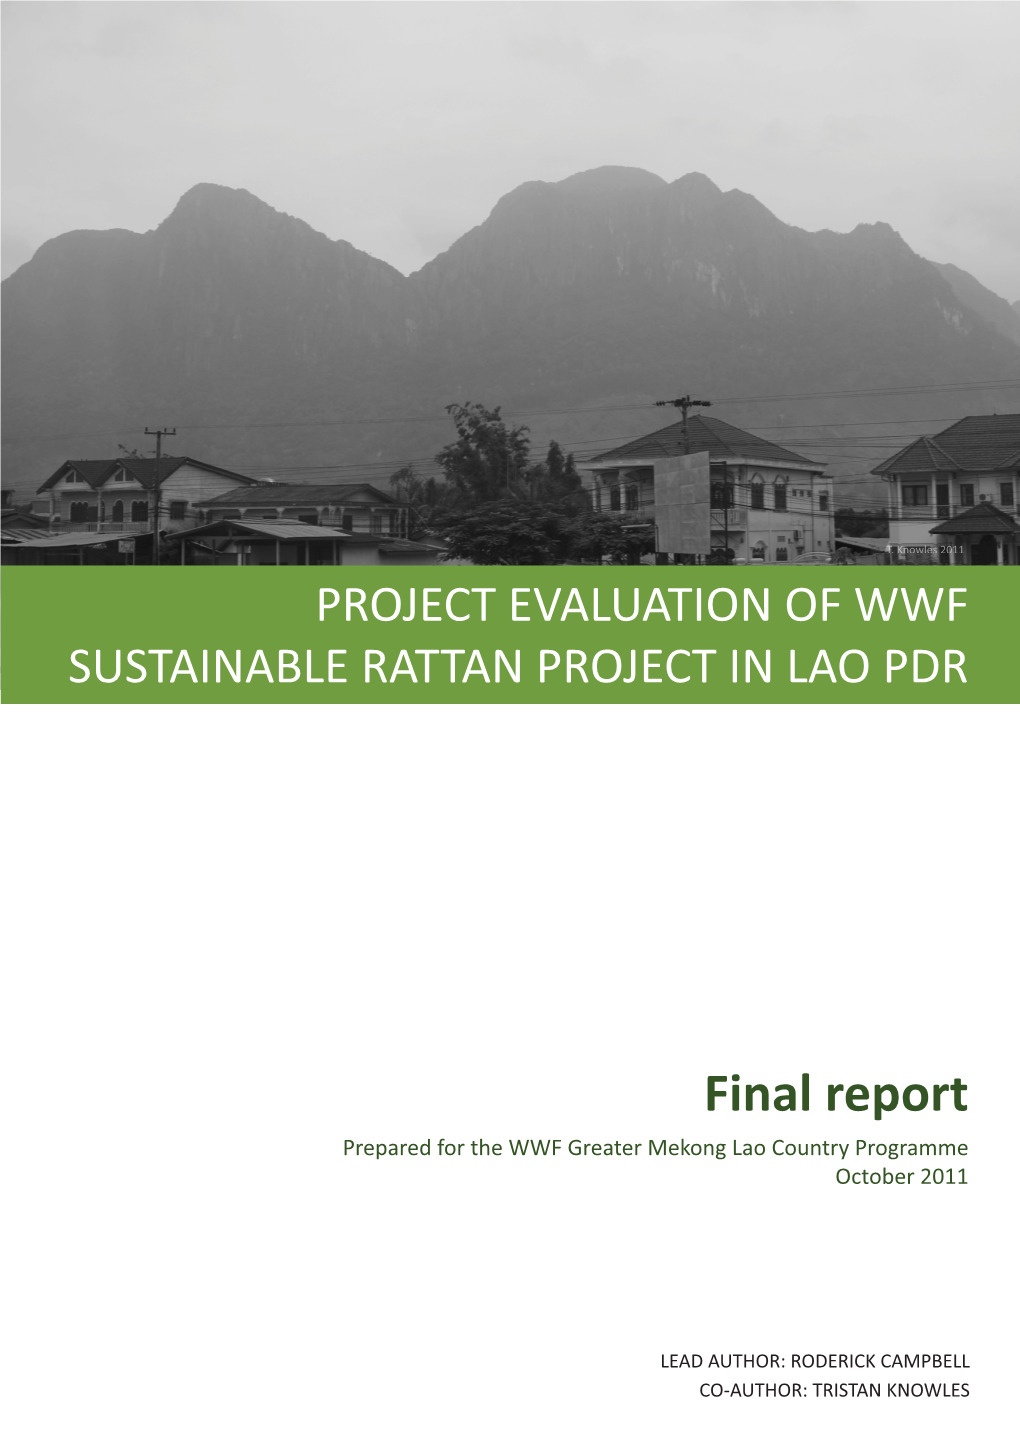 Project Evaluation of WWF Sustainable Rattan Project in Lao PDR